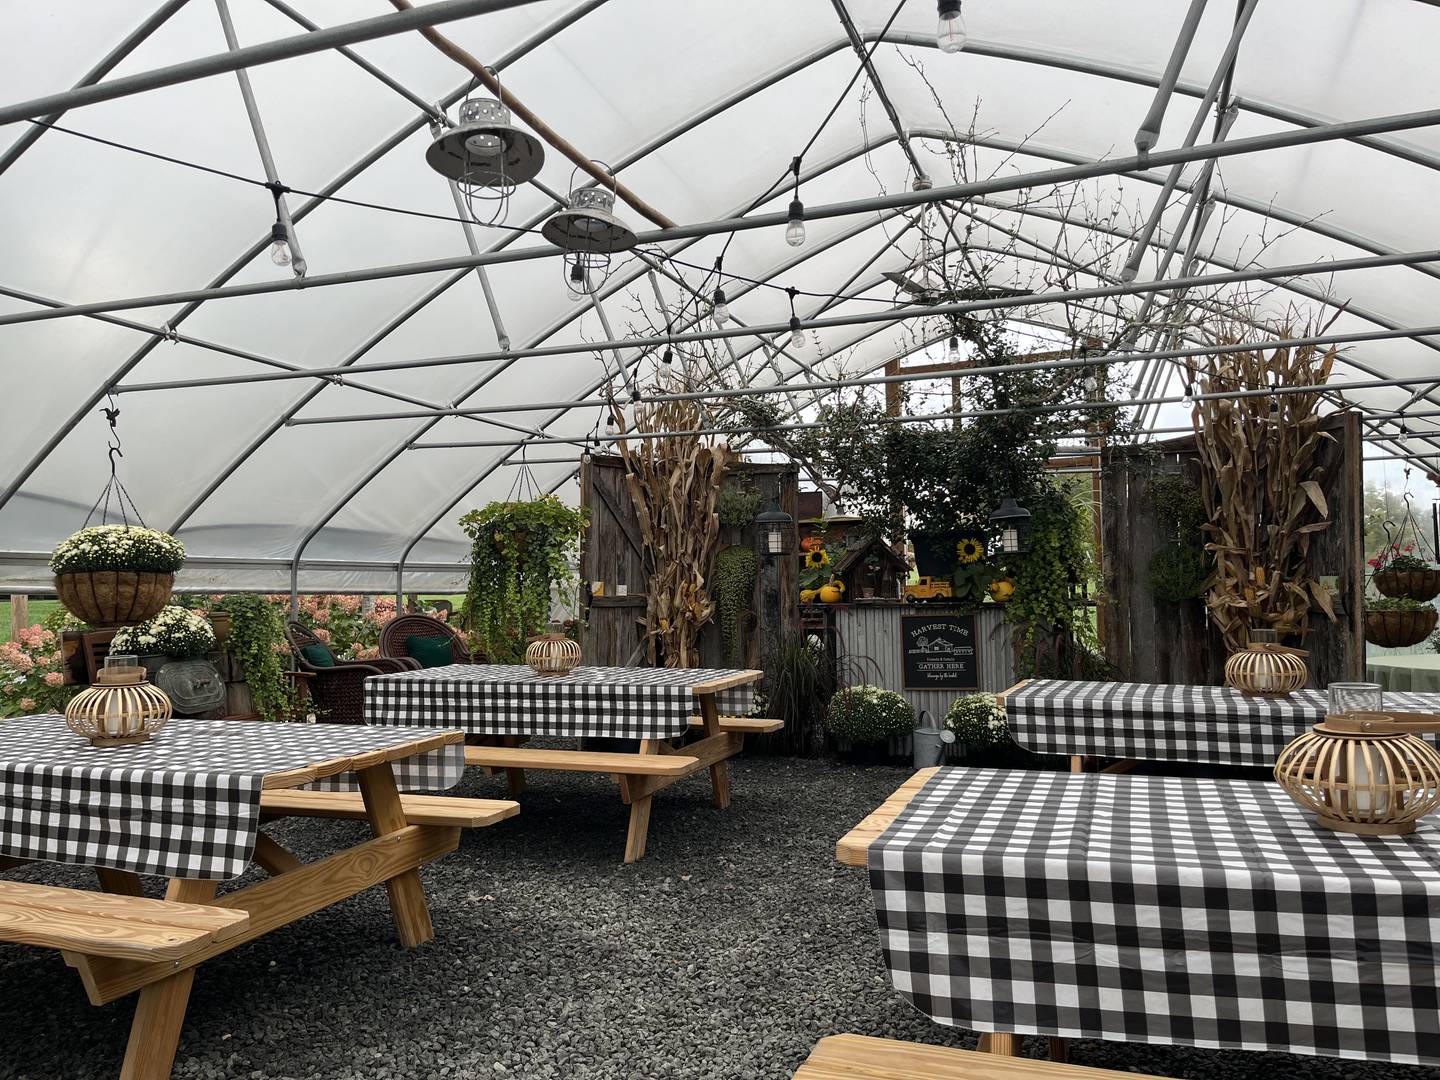 The Barn at 678 Vineyard in Virginia has a greenhouse seating option with flowers and picnic tables.